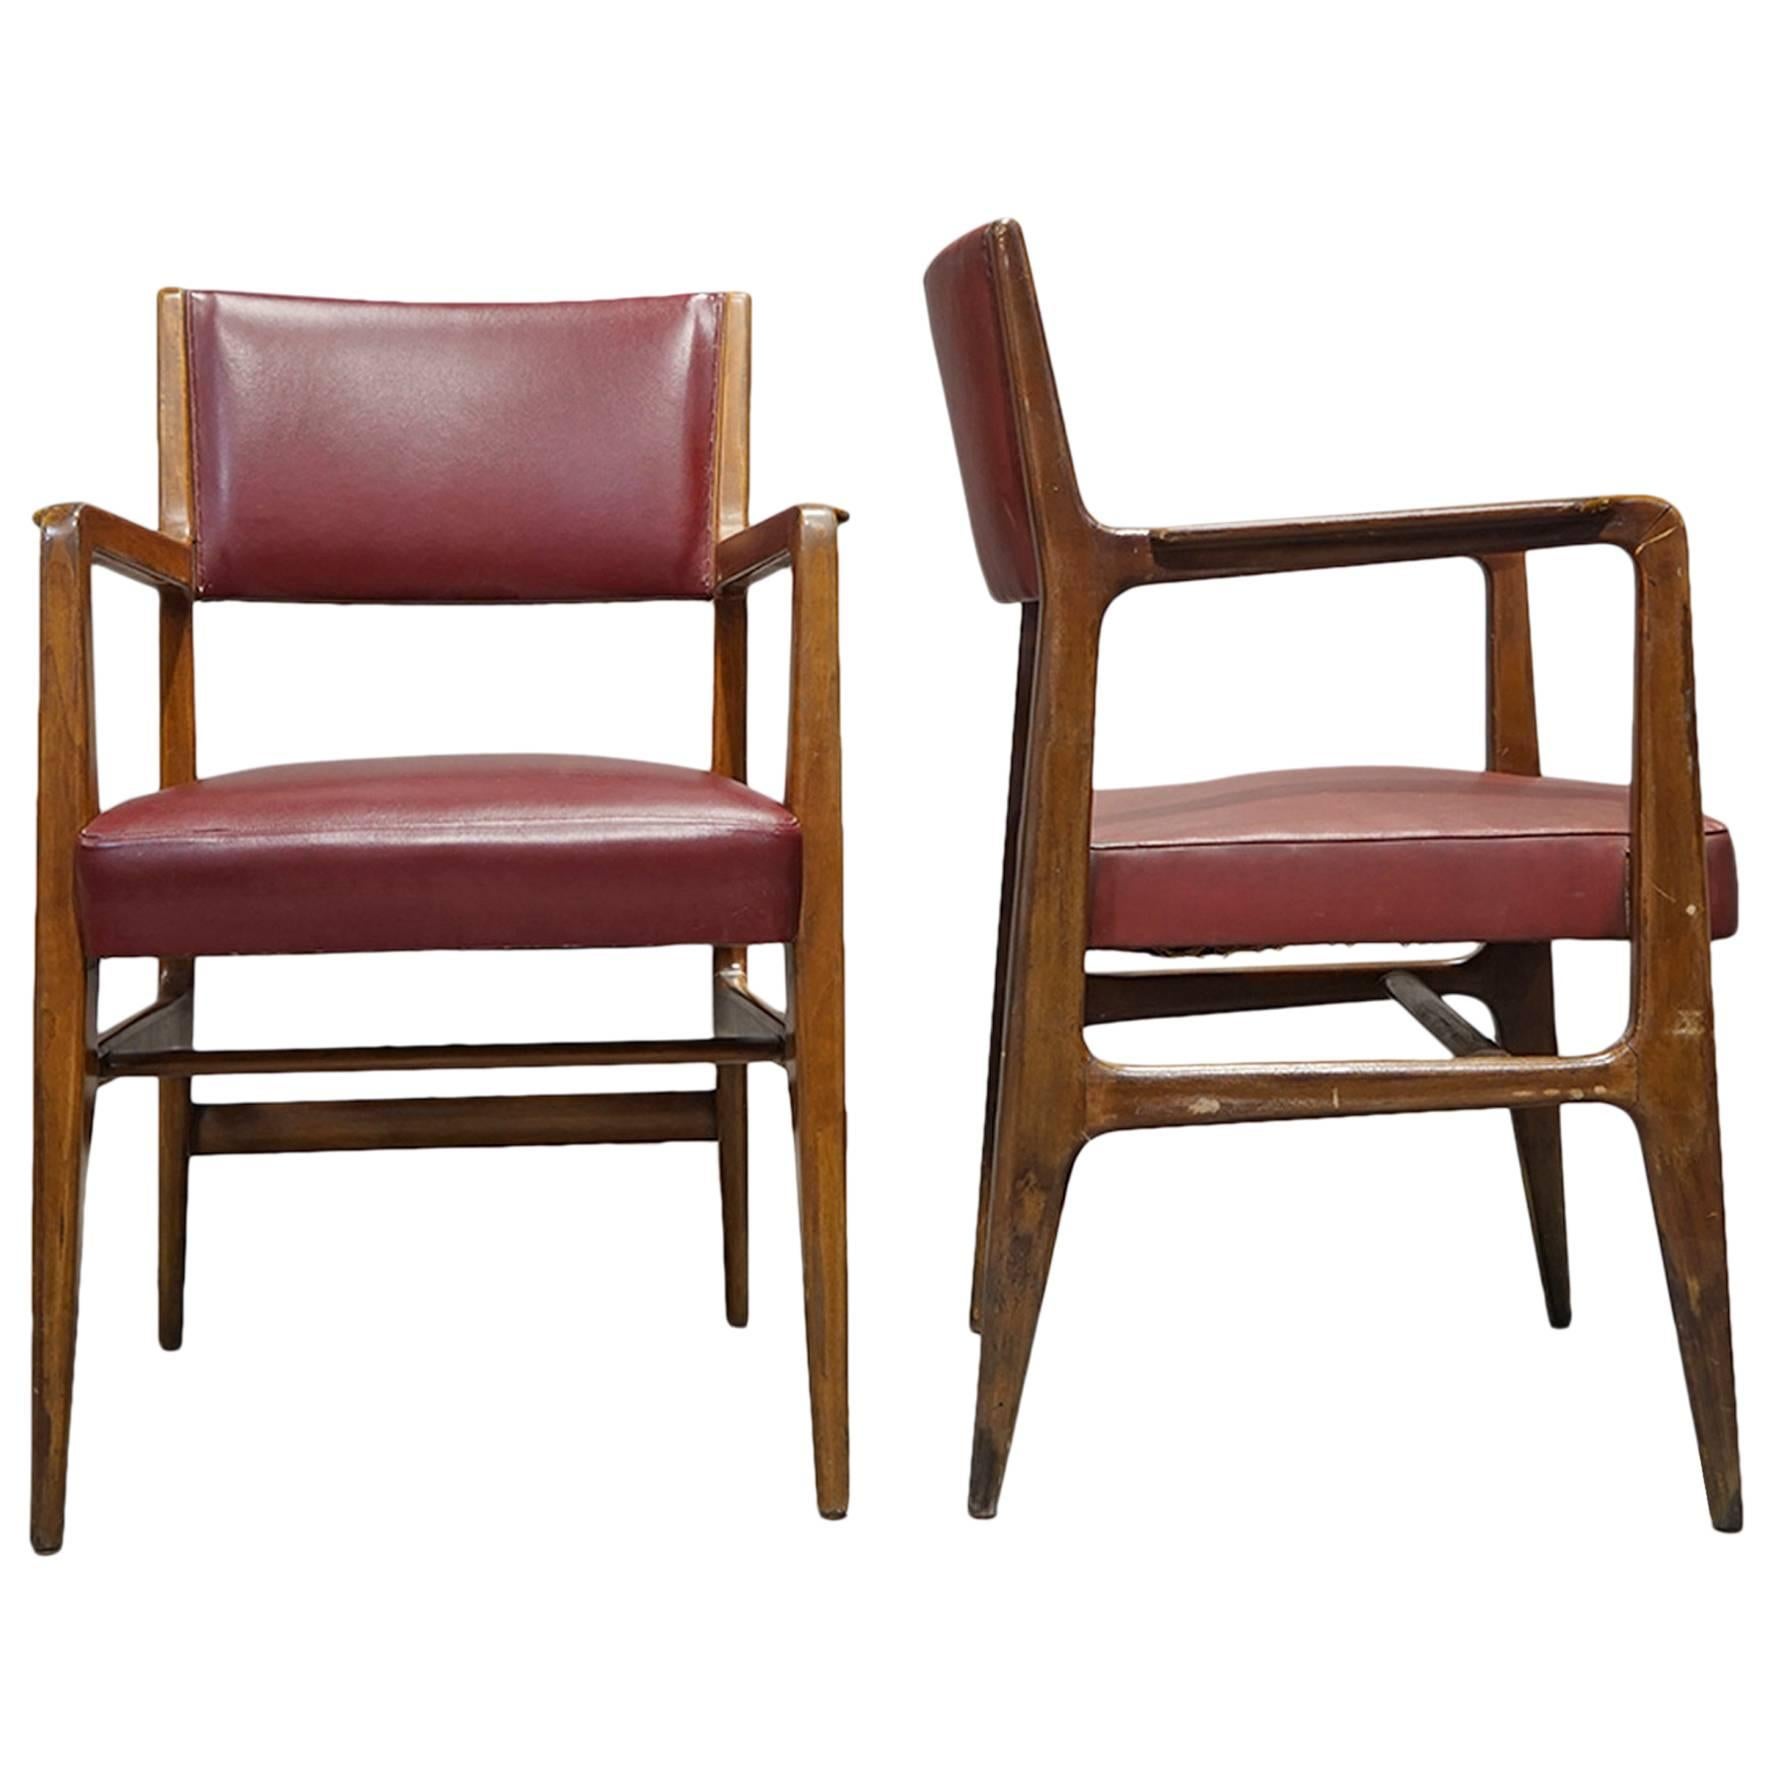 Pair of Armchairs by Gio Ponti, Cassina, 1950